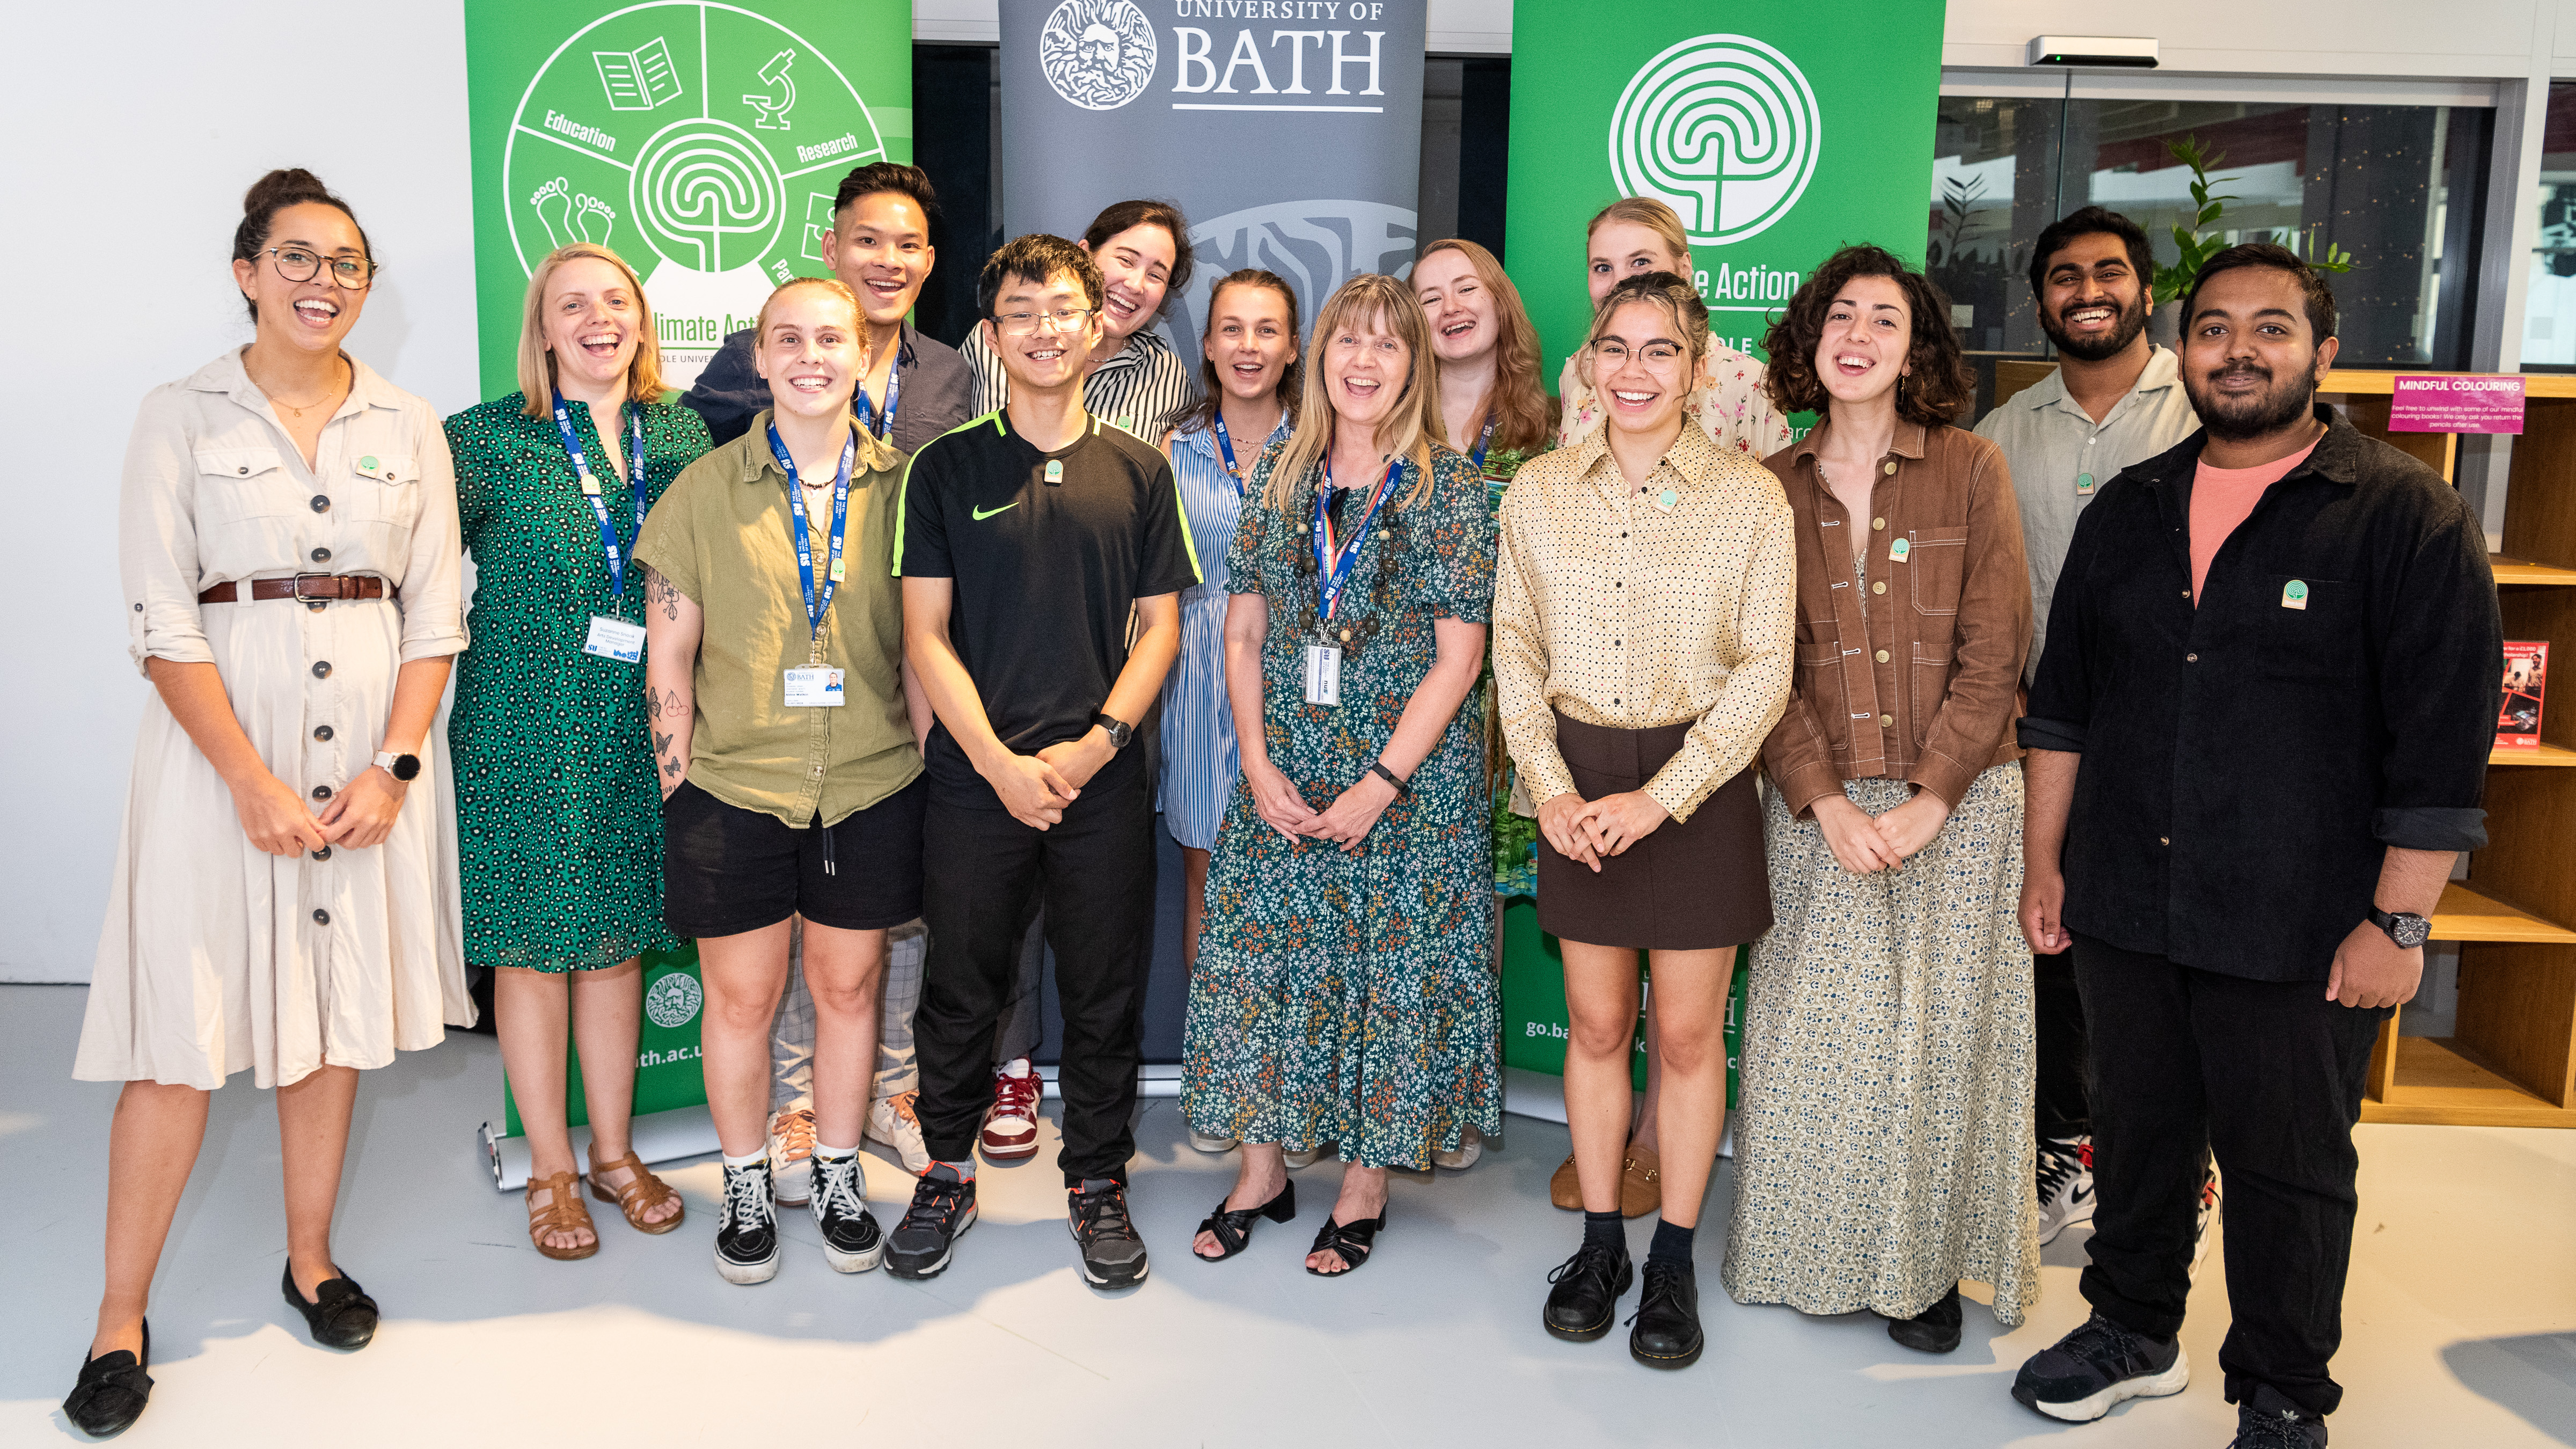 Group of students and members of the Students' Union who received Climate Action awards